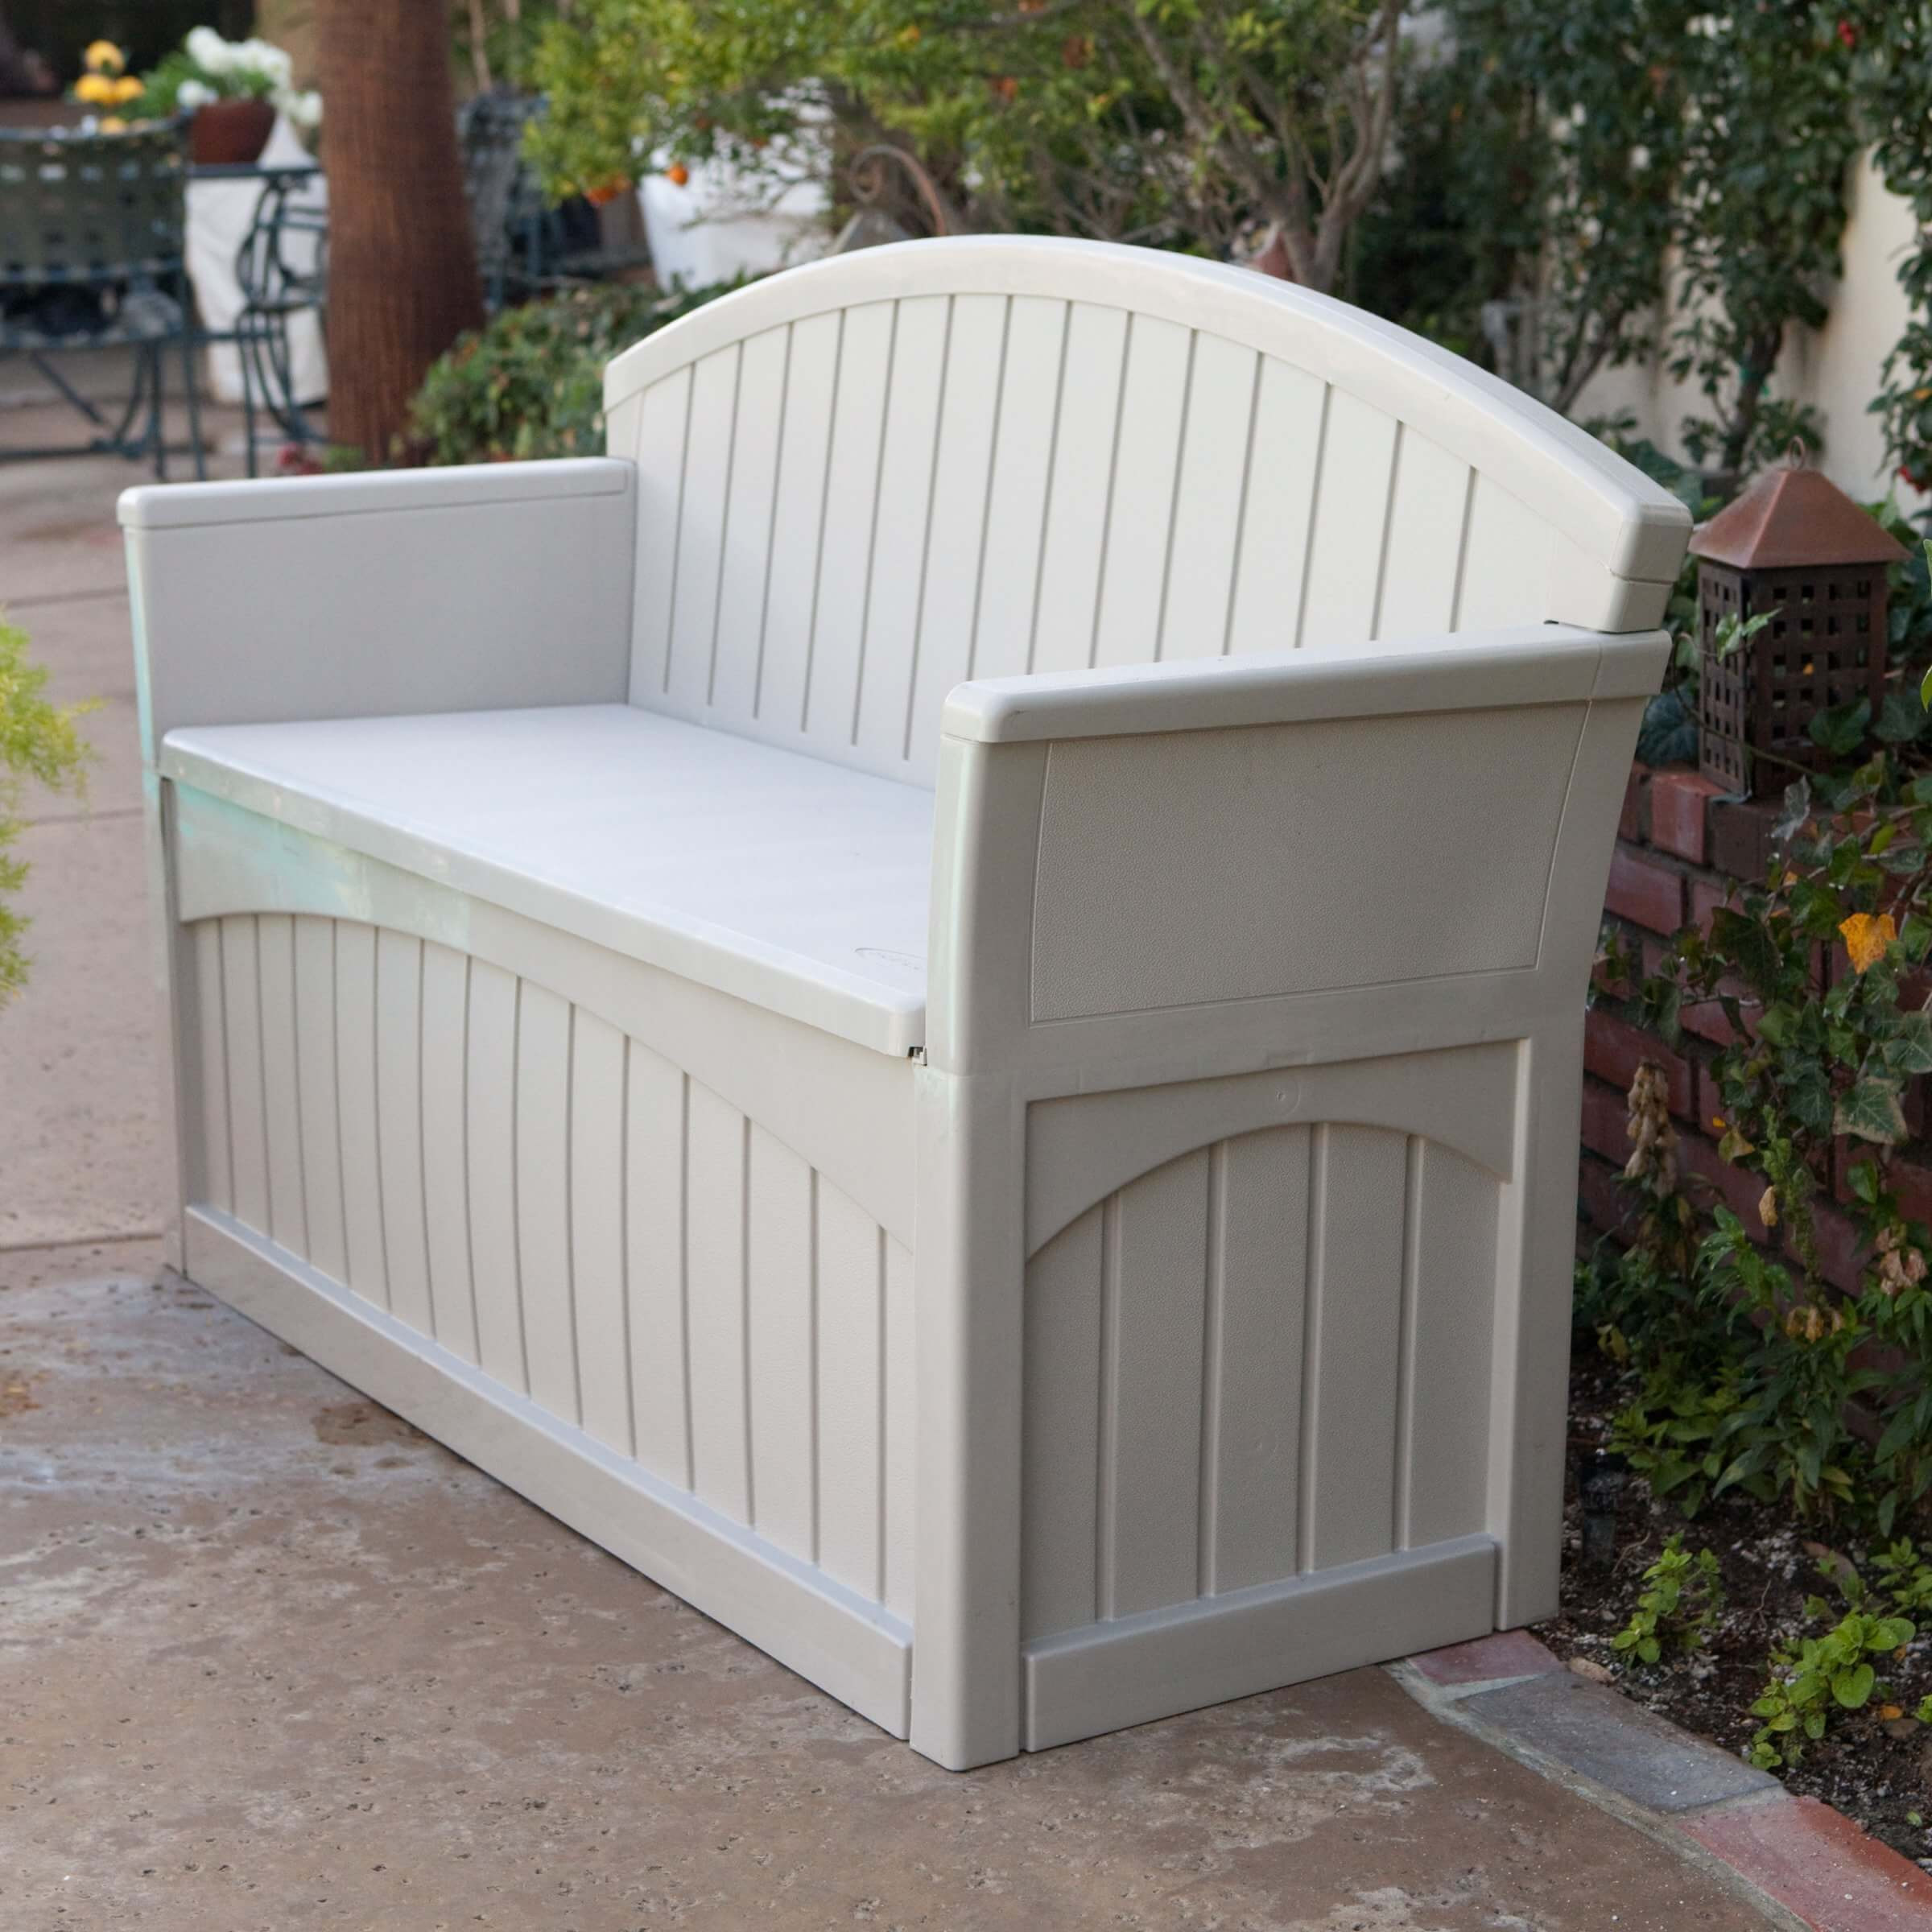 Outdoor Bench With Storage
 Top 10 Types of Outdoor Deck Storage Boxes